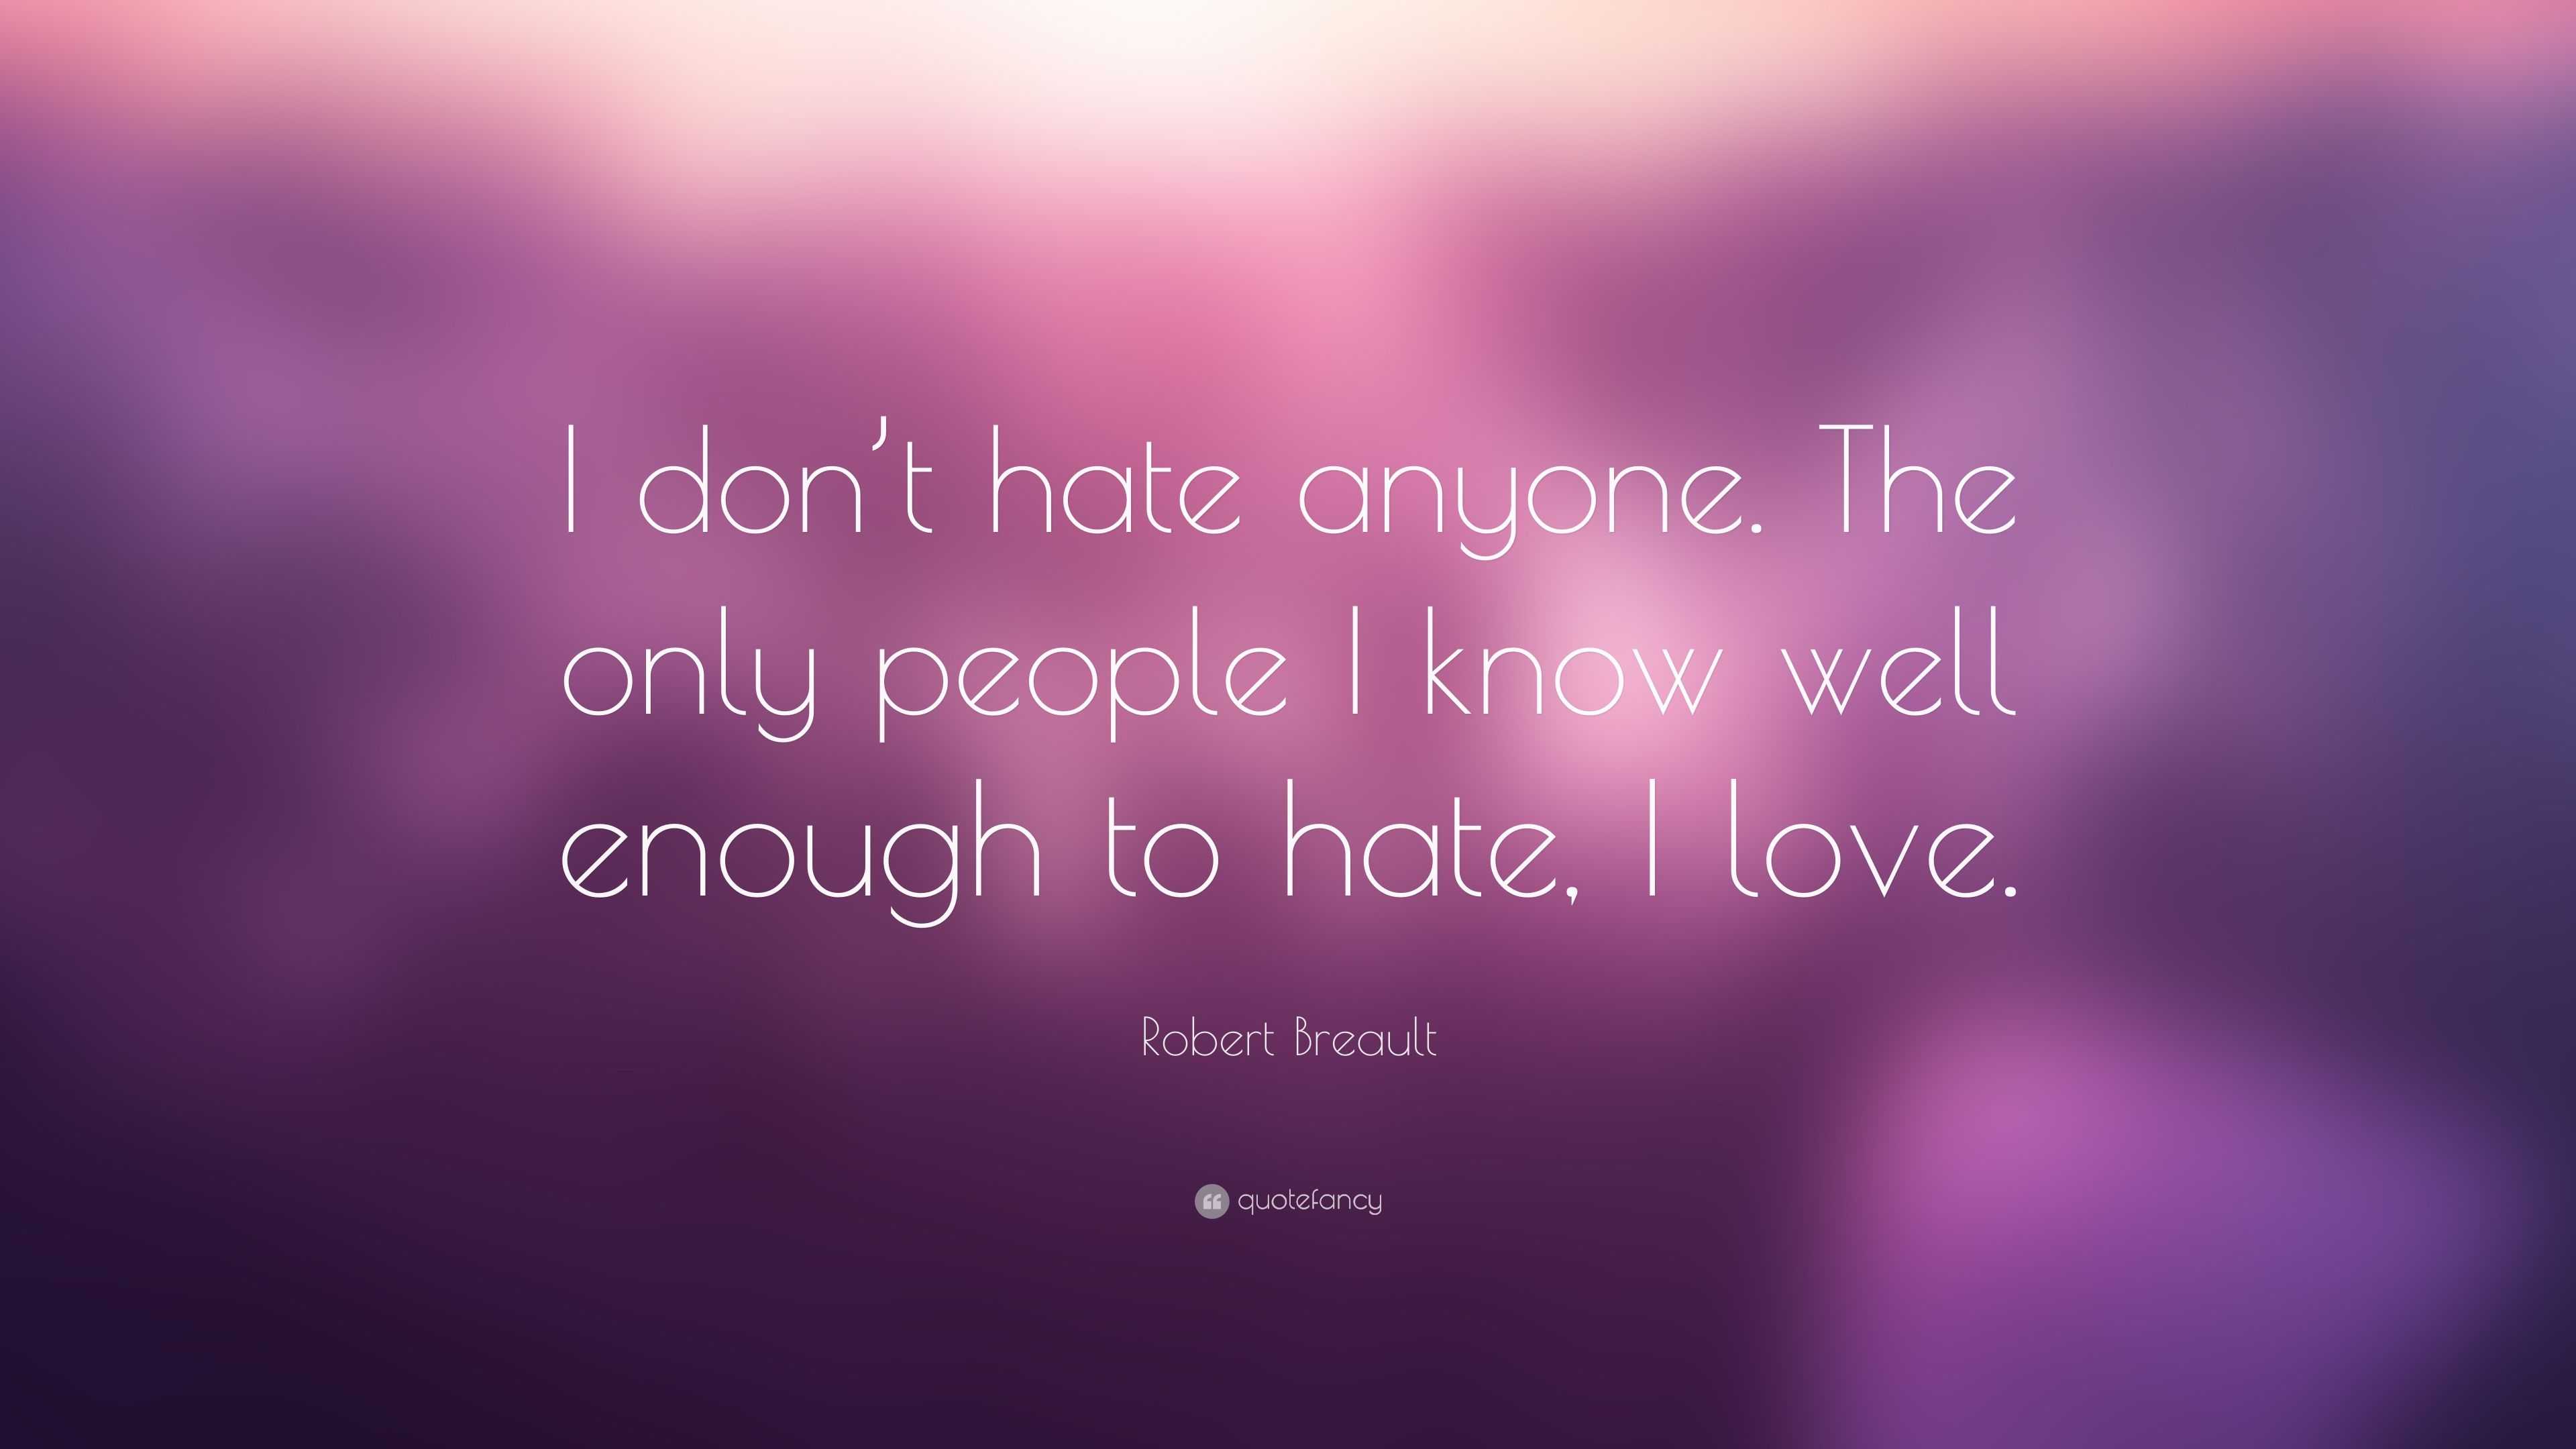 Robert Breault Quote “I don t hate anyone The only people I